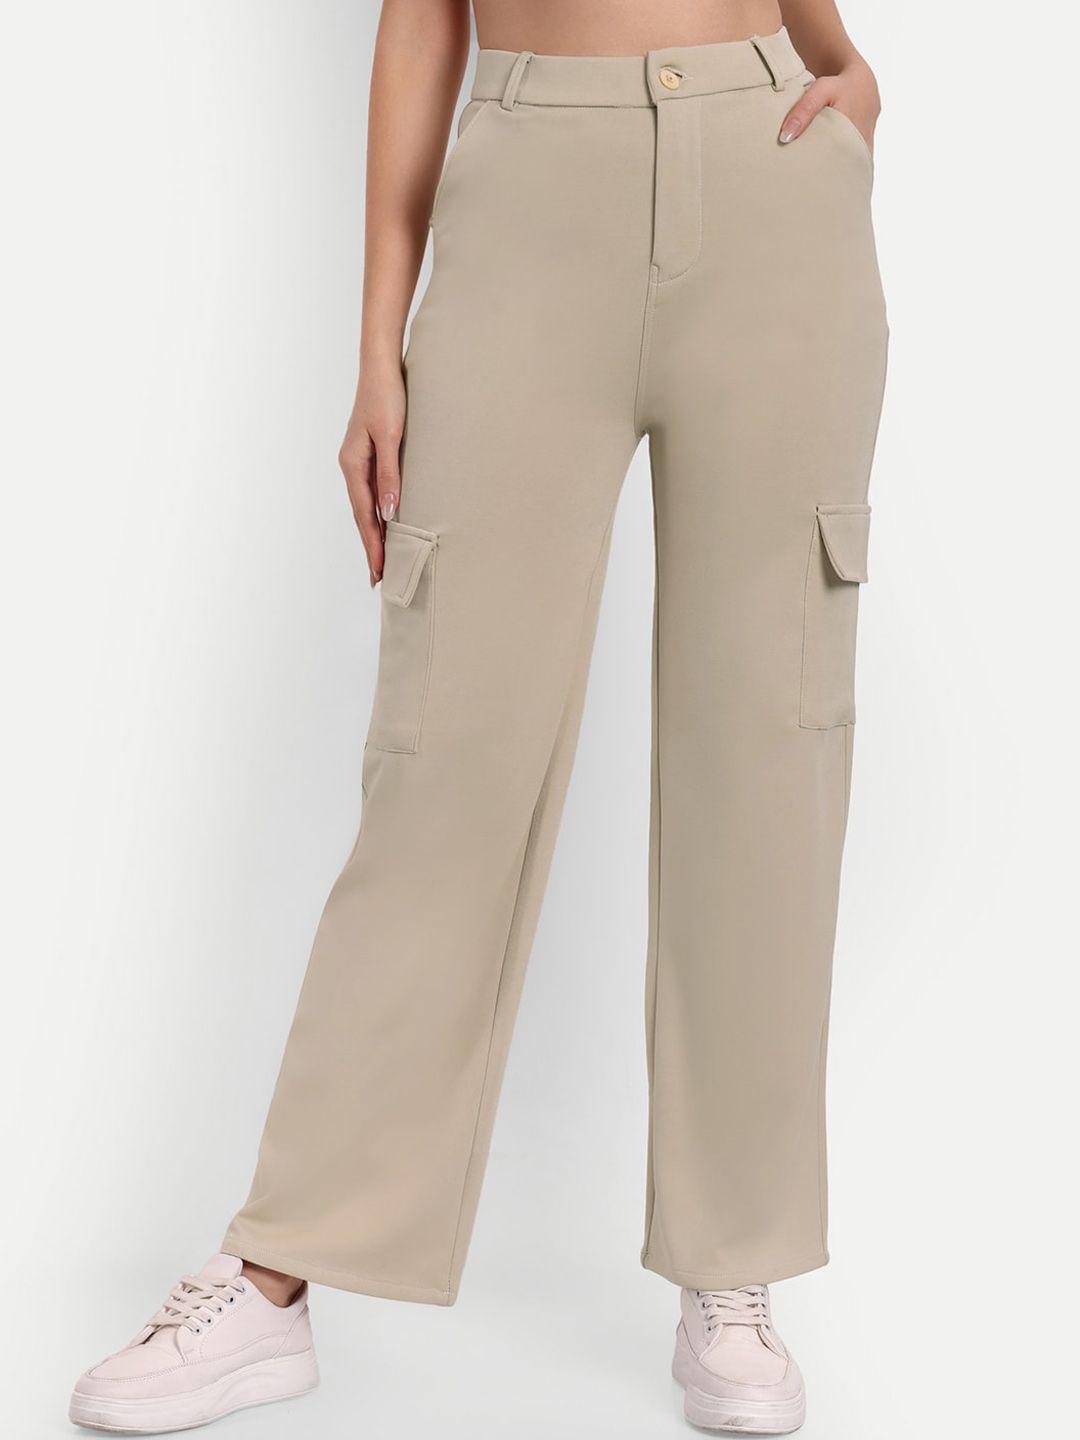 broadstar-women-smart-straight-fit-high-rise-easy-wash-cargos-trousers